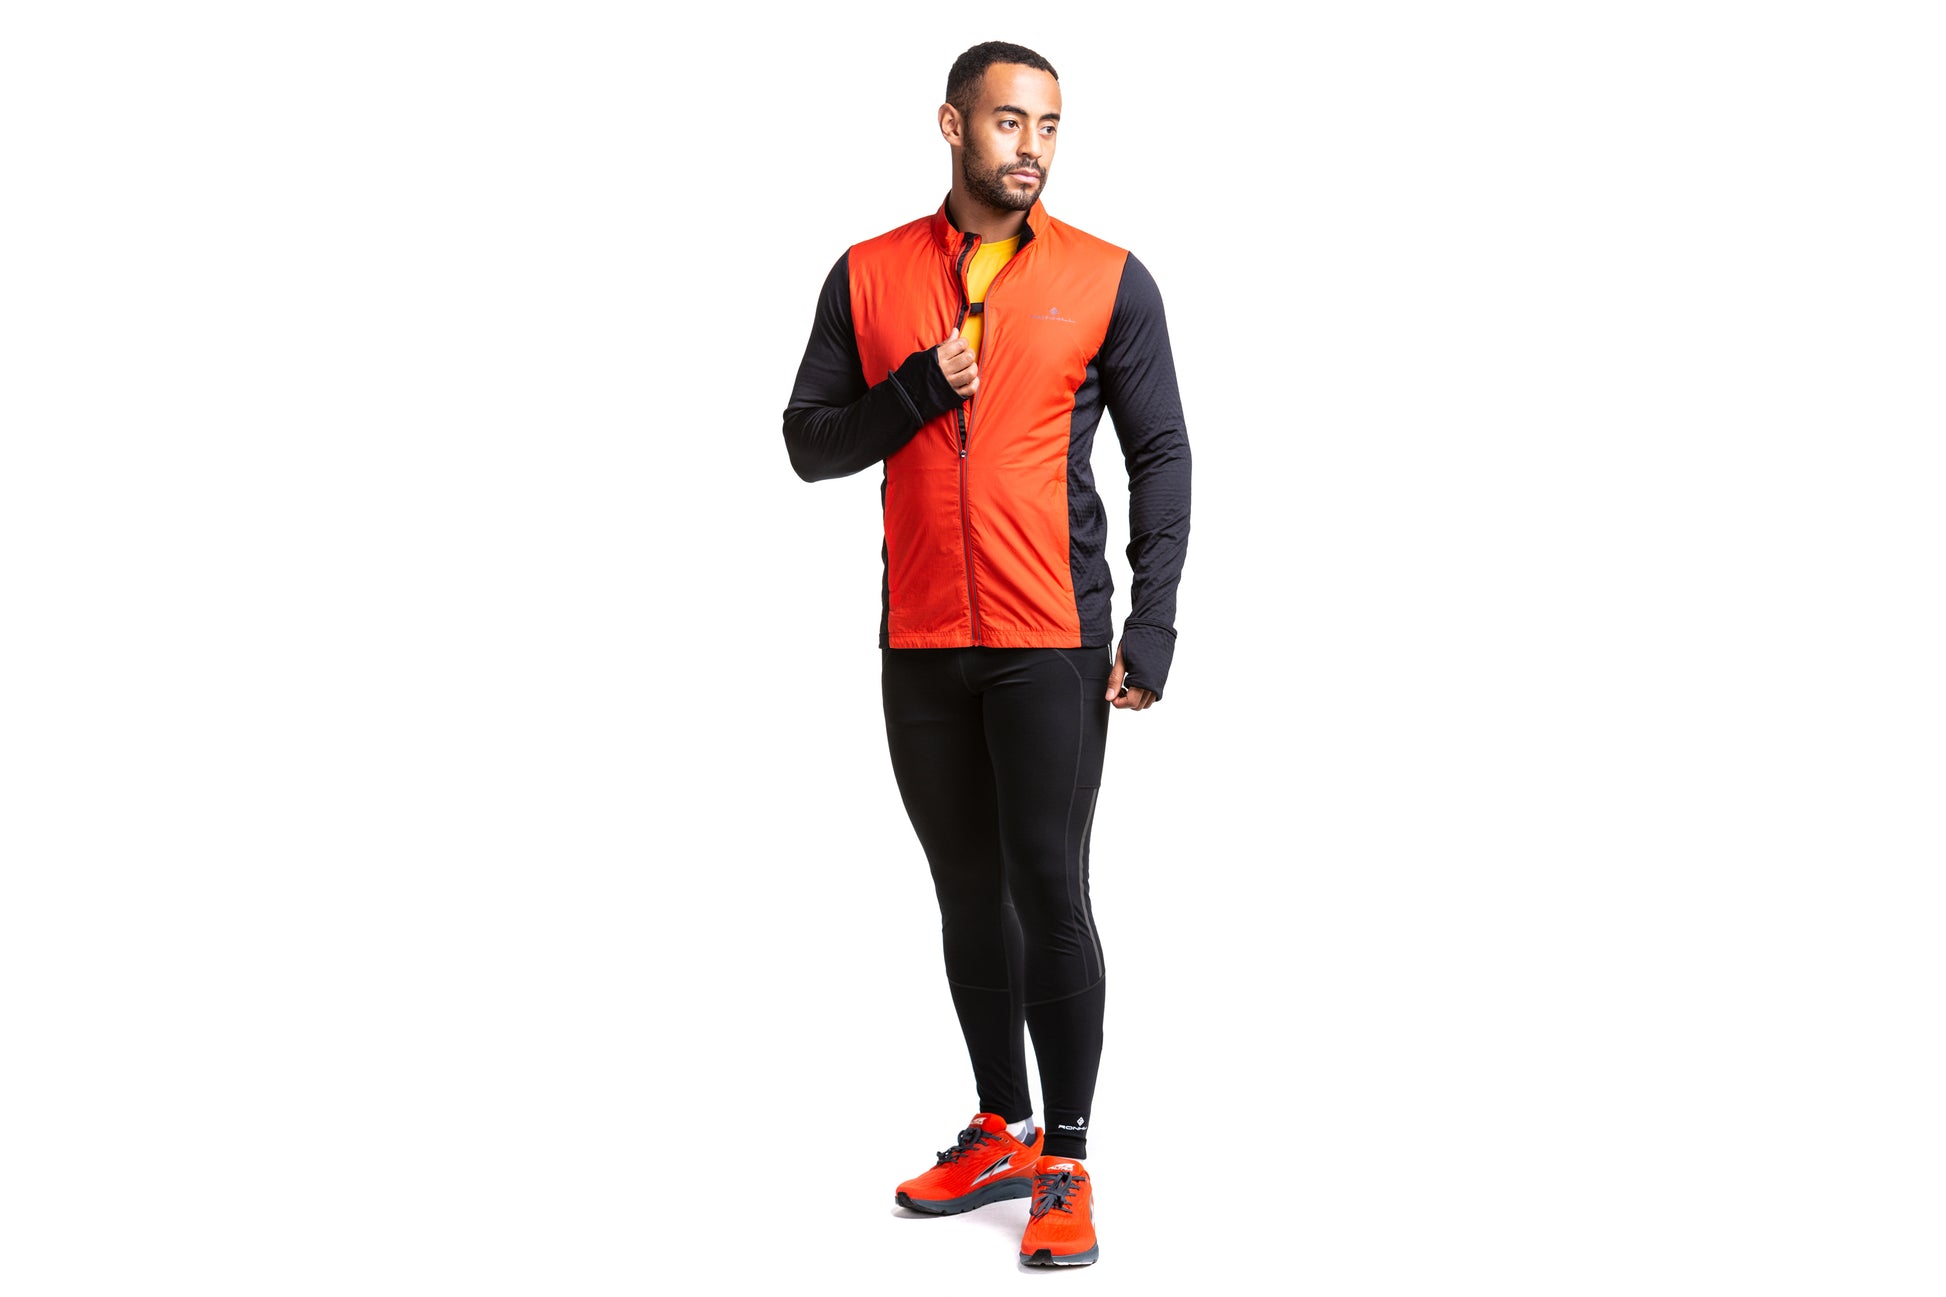 Ronhill's men's tech hyperchill jacket in flame and black shown on model